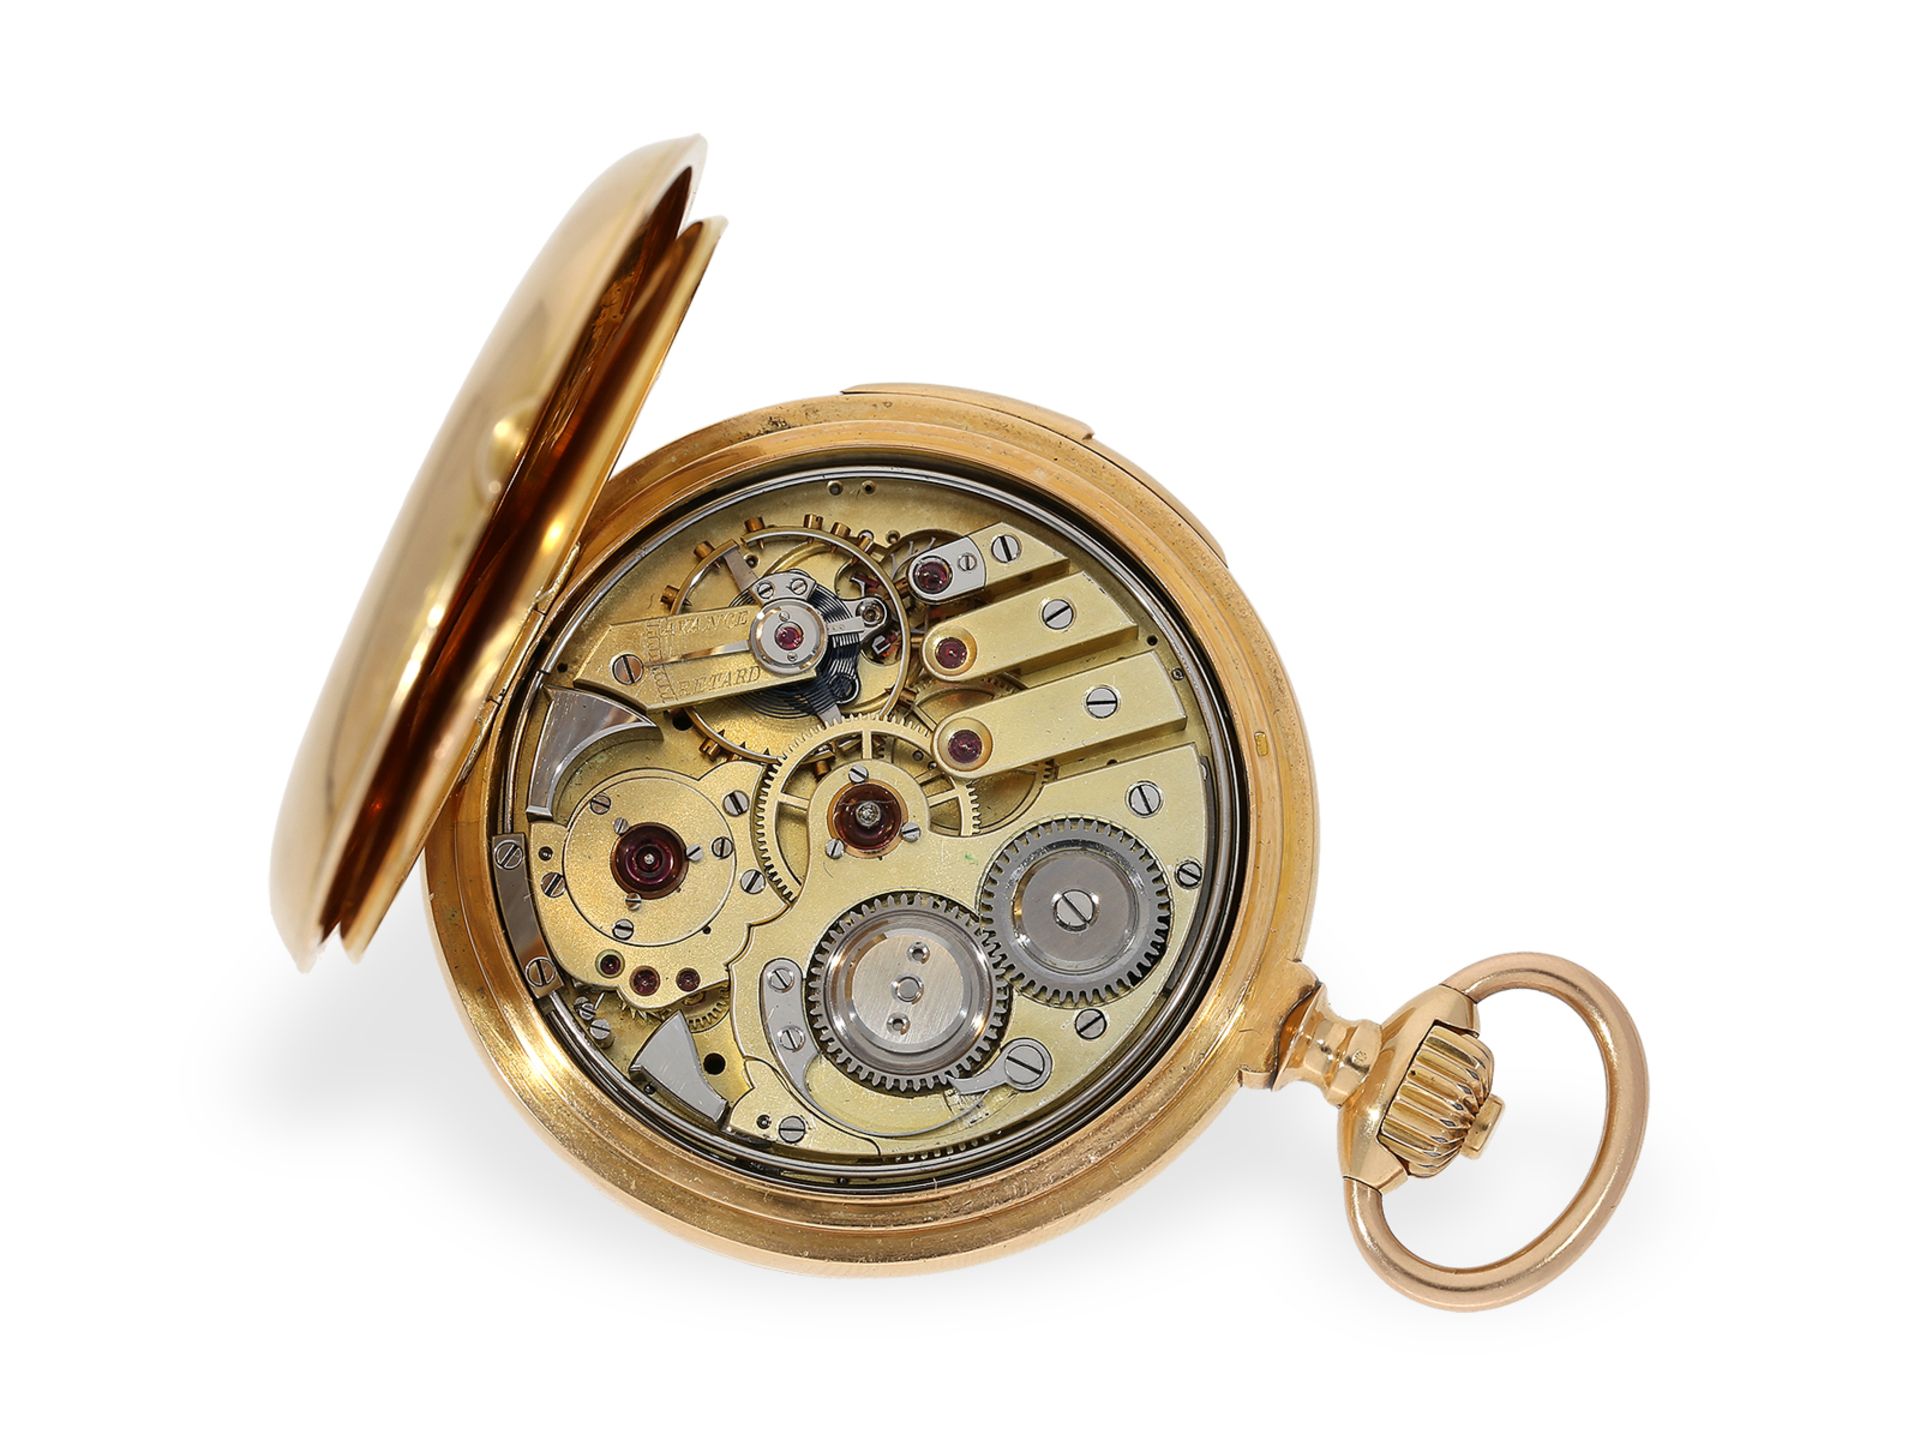 Pocket watch: very fine gold hunting case watch with repeater, probably Audemars Freres, ca. 1880 - Image 2 of 7